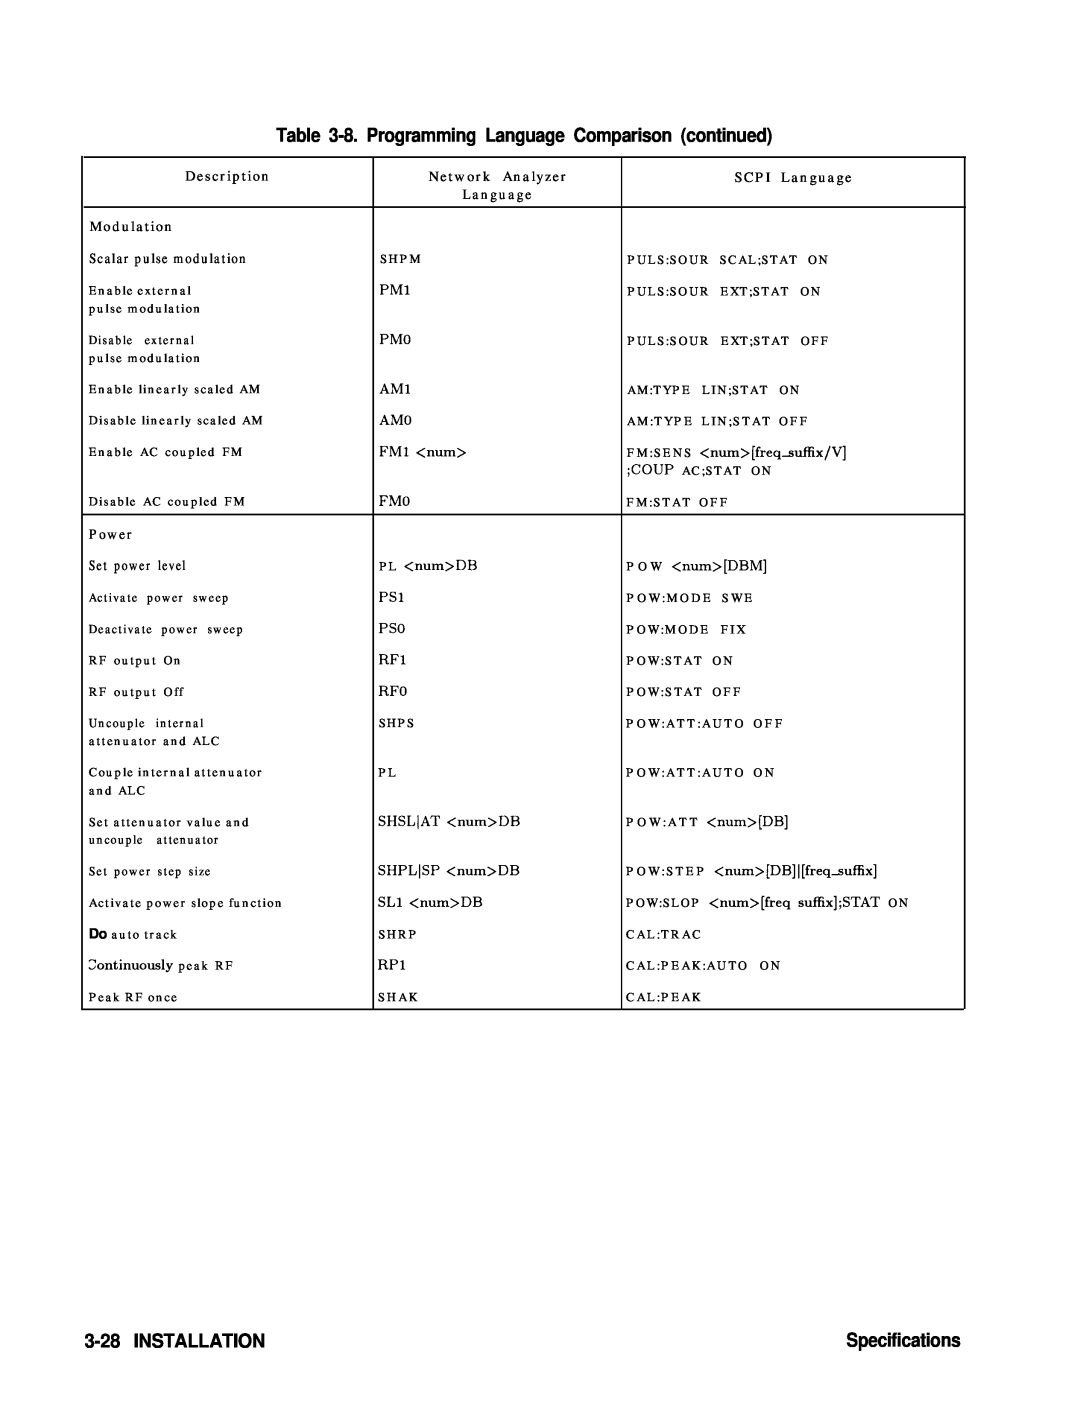 HP 22A, 83620A, 24A manual 8. Programming Language Comparison continued, Installation, Specifications 